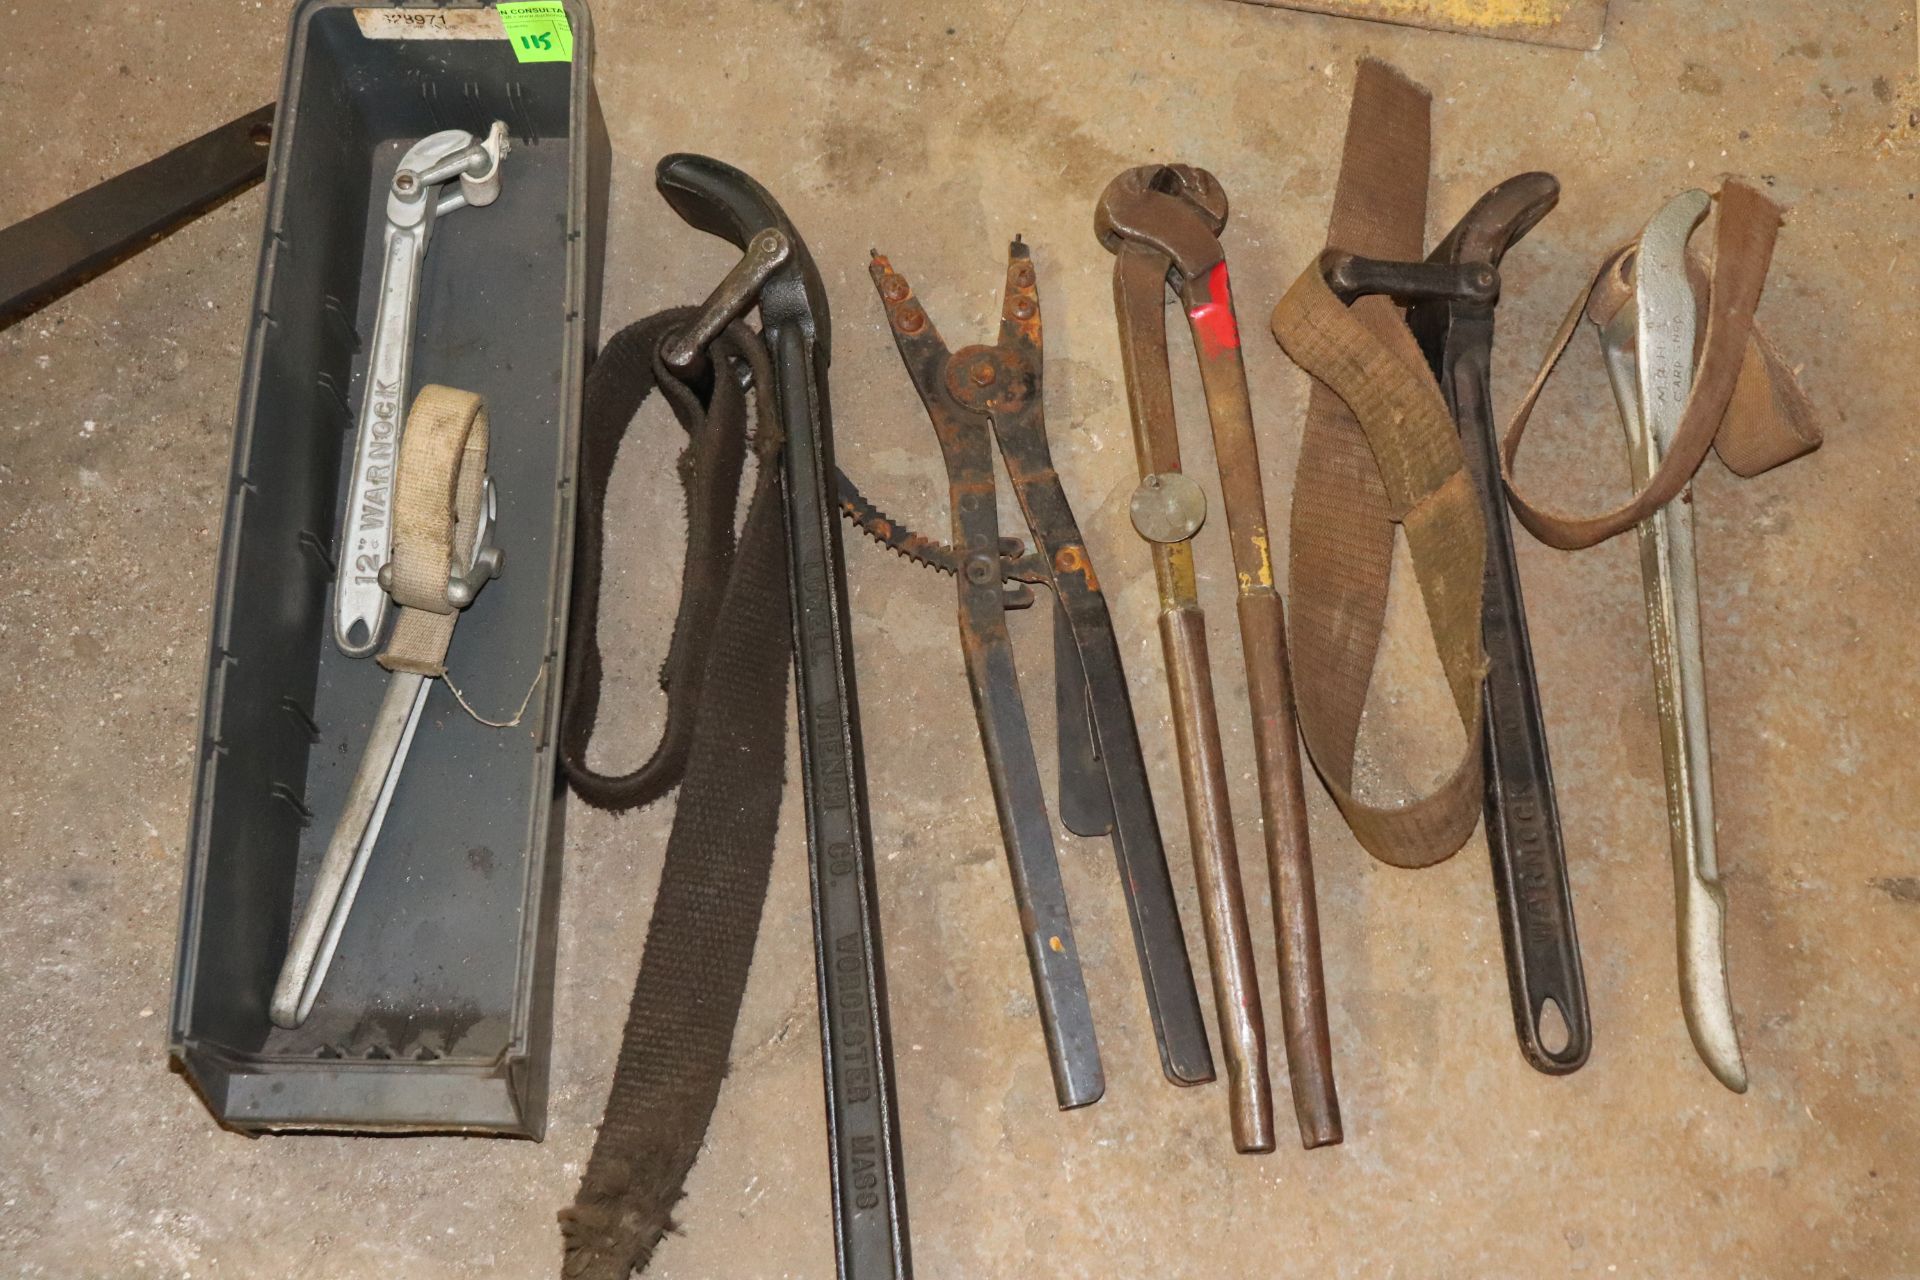 Banding strap and other wrenches